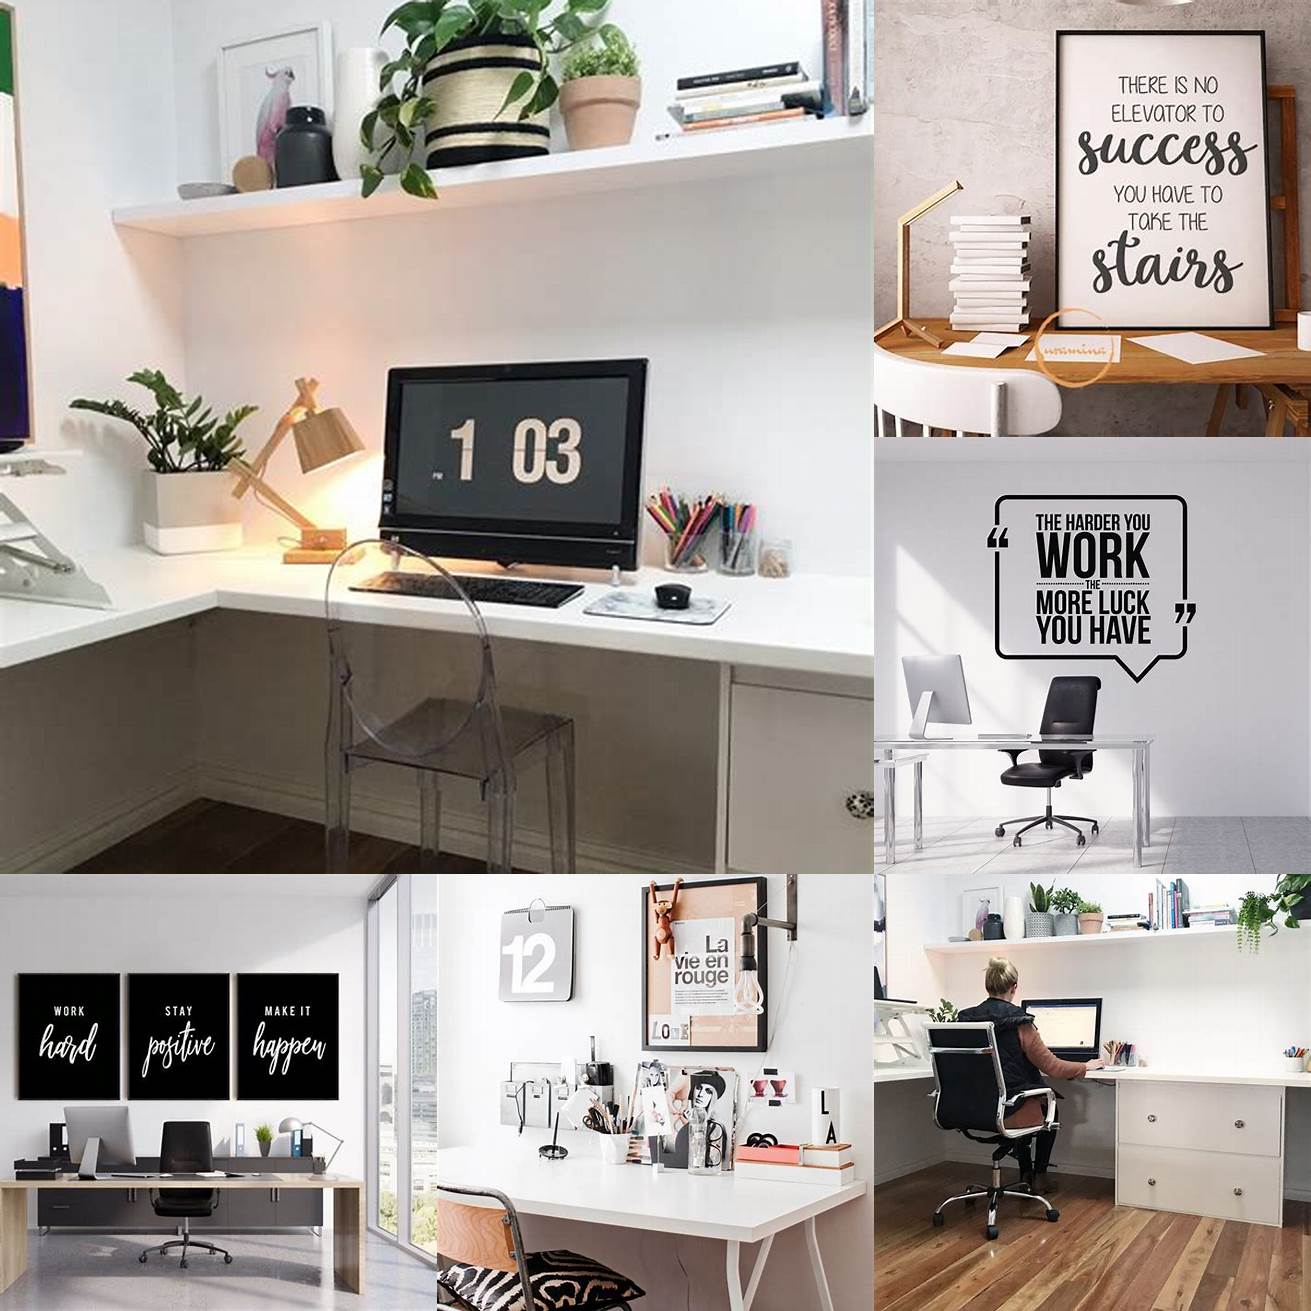 This desk includes string lights and inspirational quotes to create a motivating and inspiring workspace